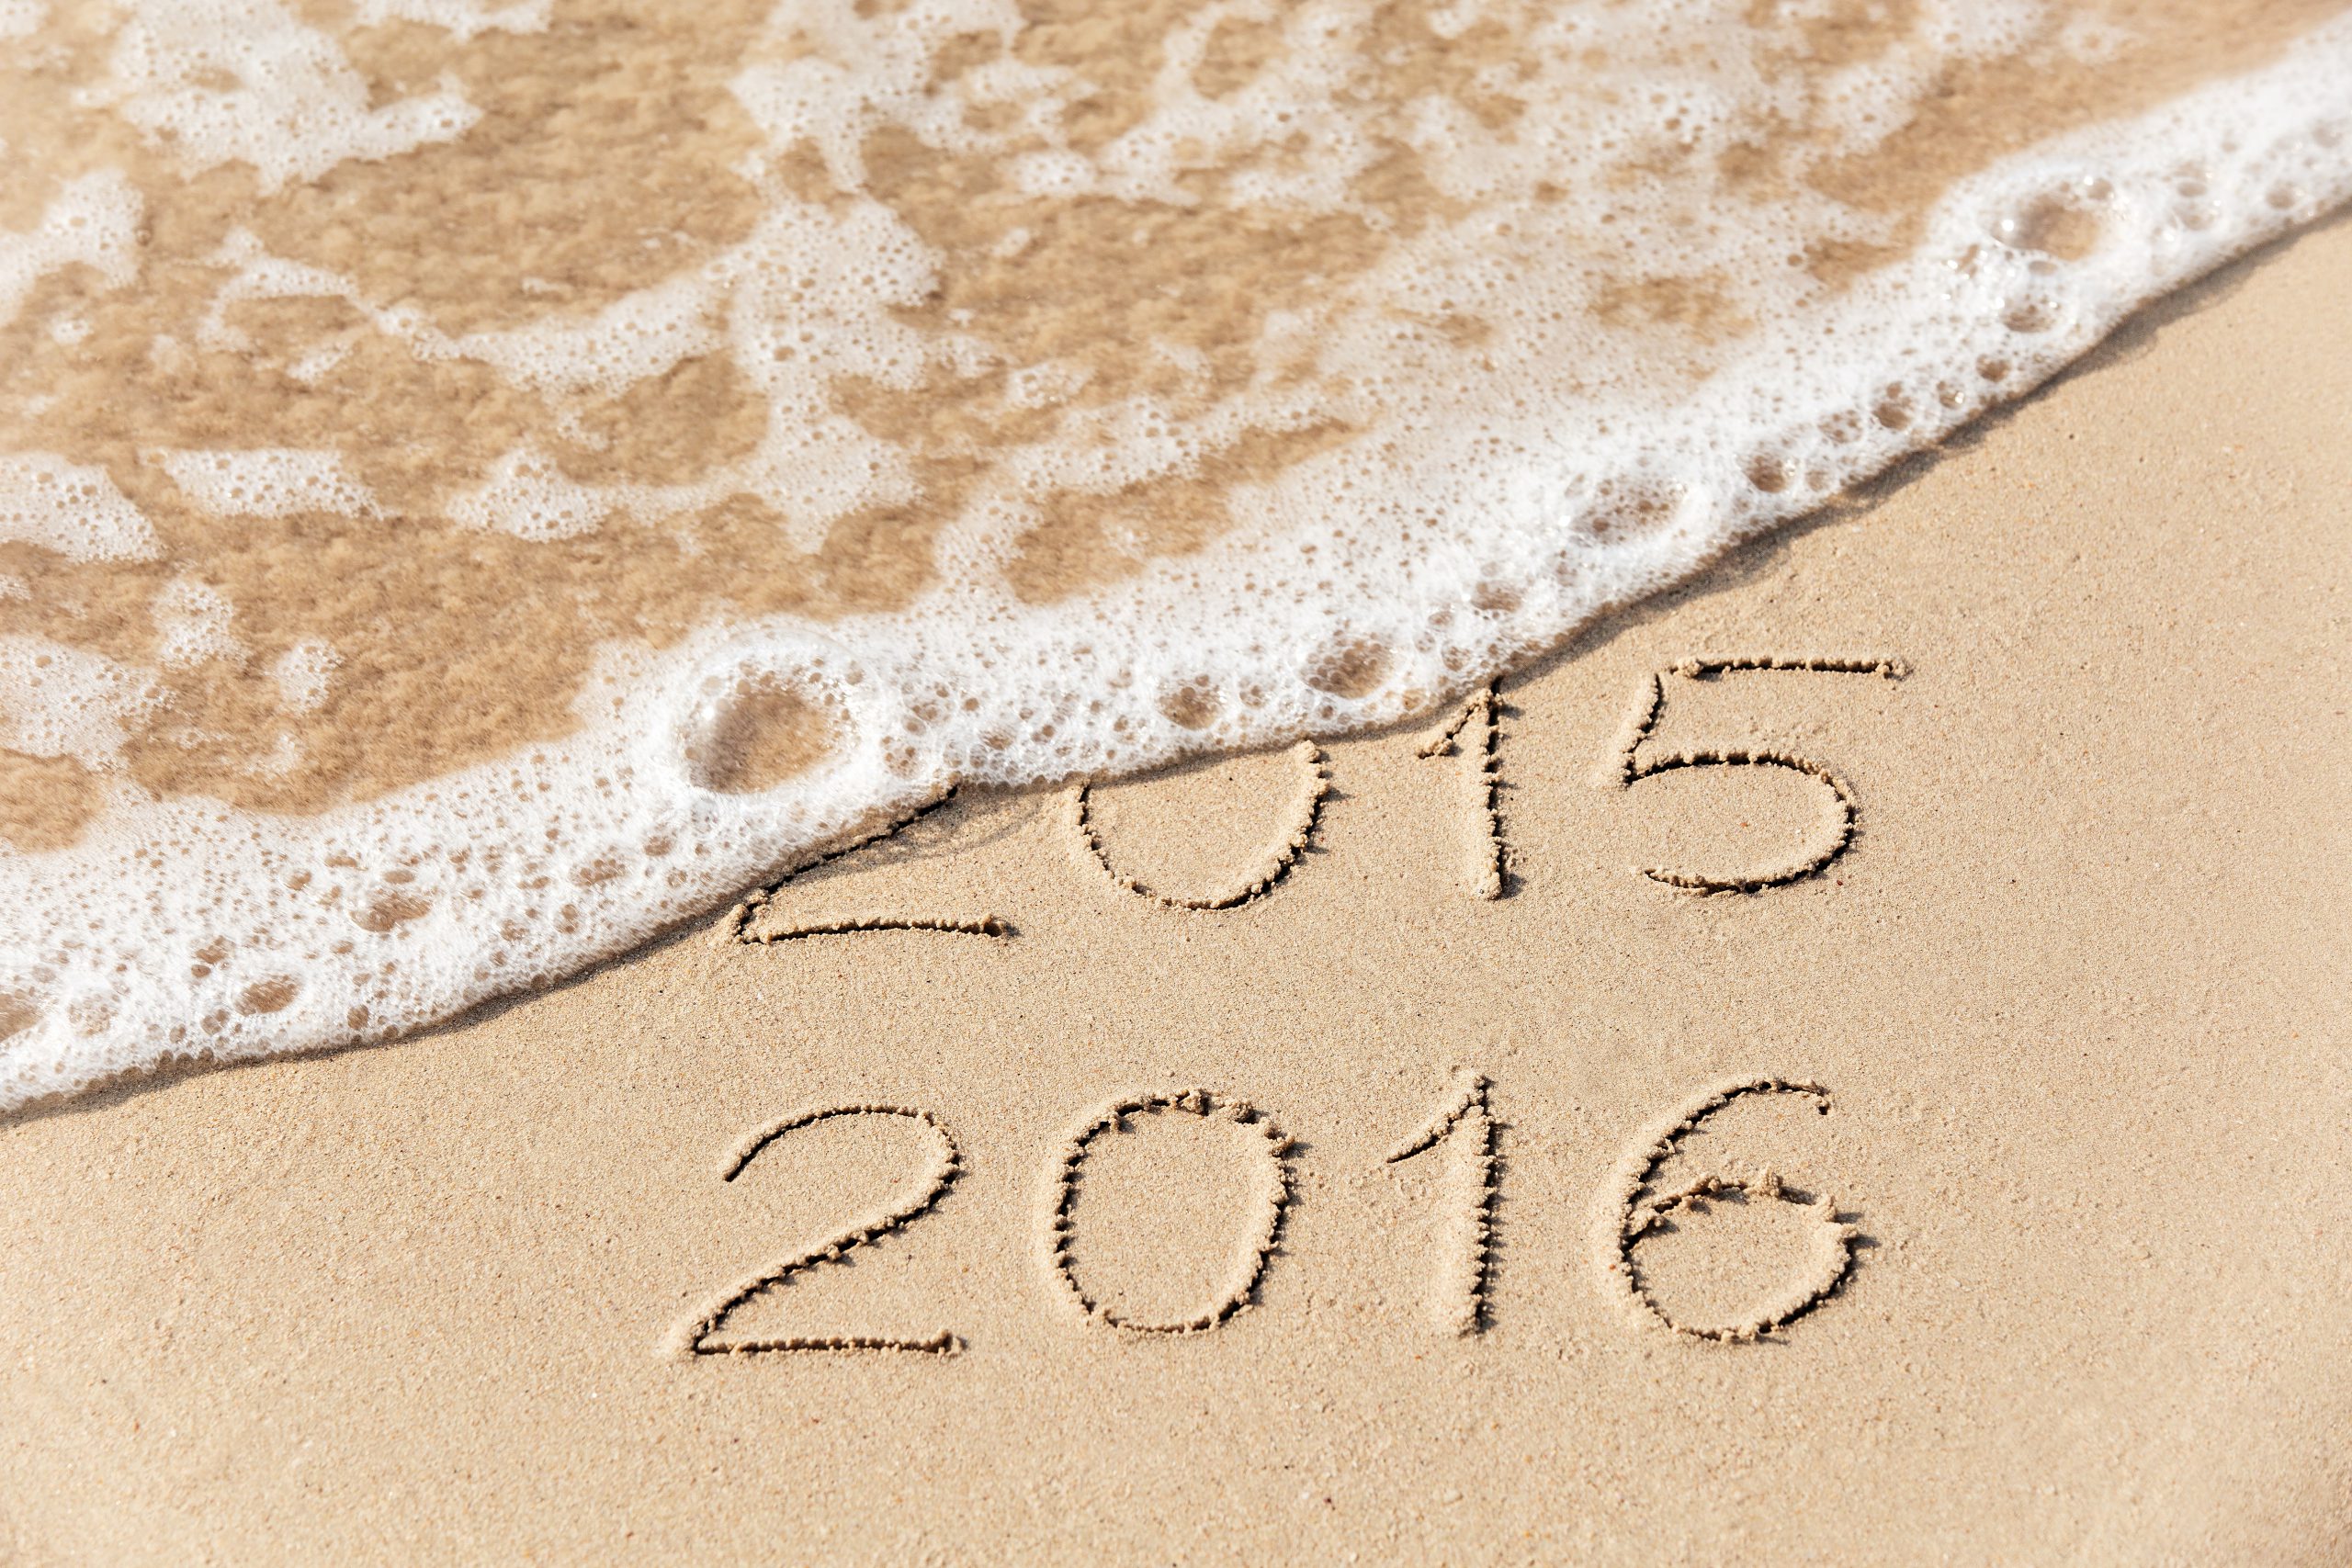 2015 2016 inscription written in the wet yellow beach sand being